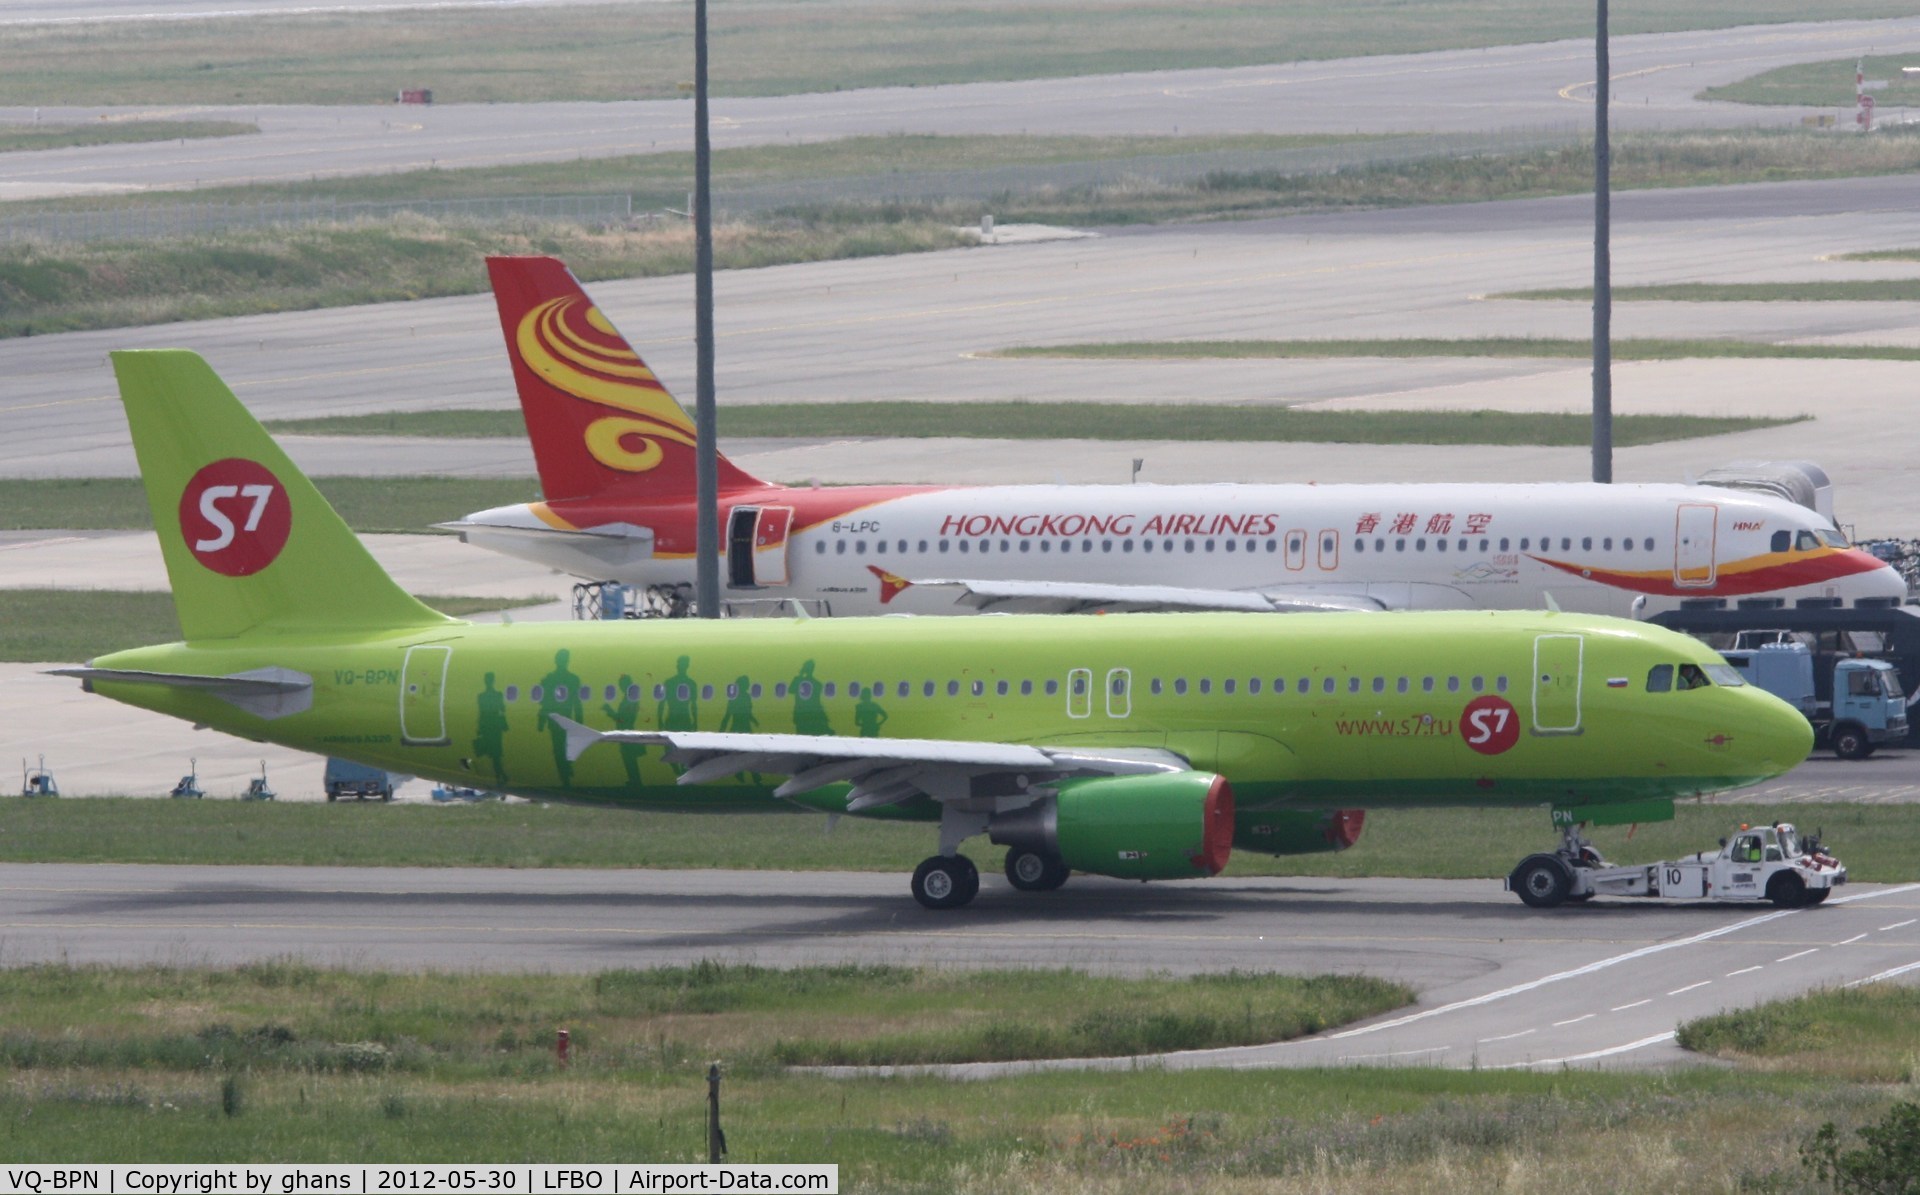 VQ-BPN, 2012 Airbus A320-214 C/N 5167, to be delivered 2012-06-01